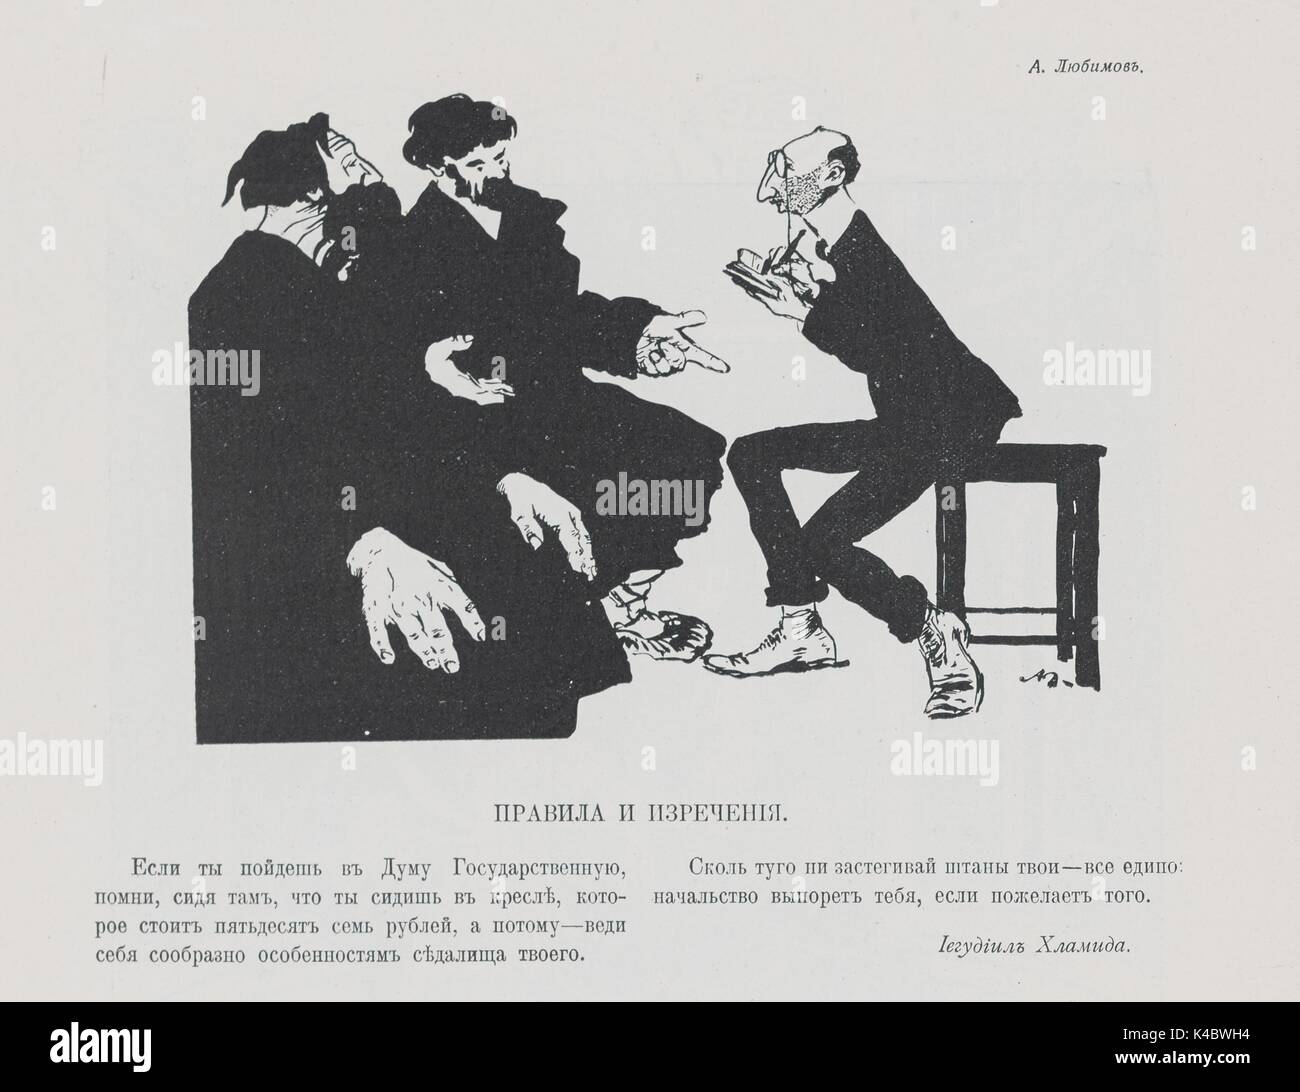 Cartoon titled Rules and Aphorisms, showing a clerk writing down notes dictated by two men, with dialog reading 'If you go to the State Duma, remember that, whilst sitting there, you are sitting in an armchair that costs fifty seven roubles, so behave in accordance with your seat', signed A Liubimov, 1906. The cartoon satirizes apparent opulence of the local government bodies, Dumas. Stock Photo